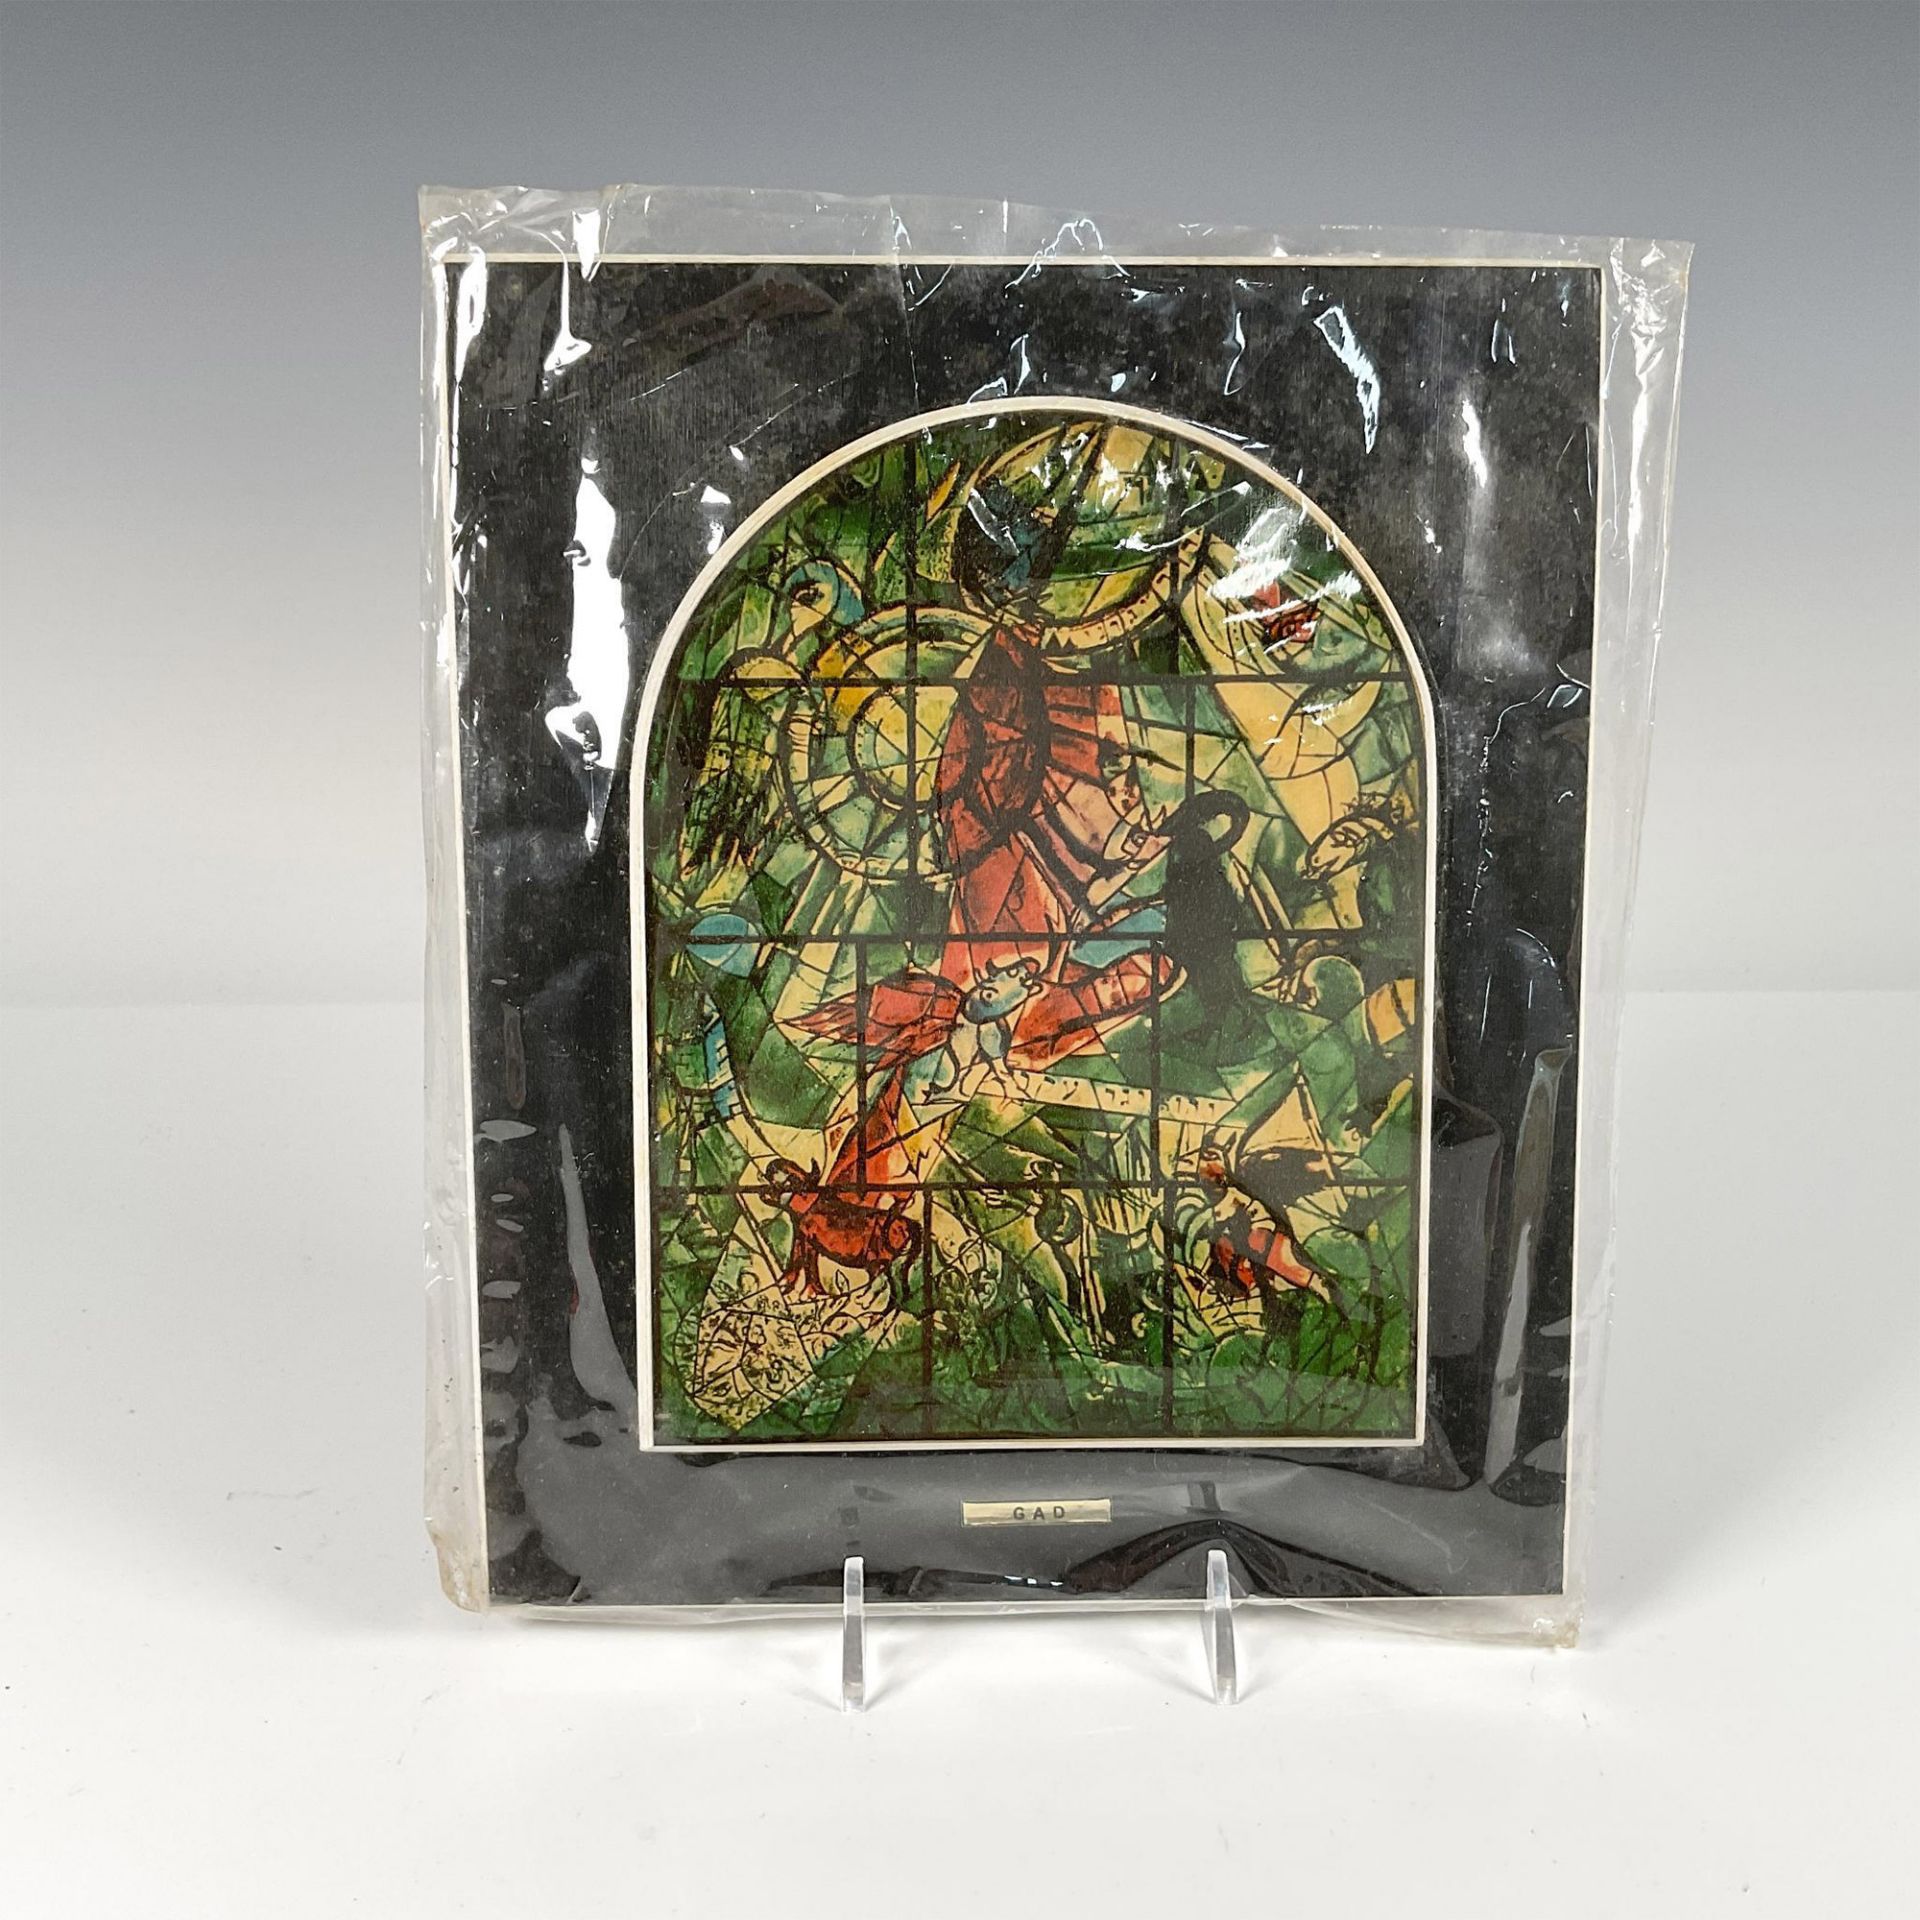 13pc After Marc Chagall by Avissar Wooden Plaques, The 12 Stained Glass Windows - Image 16 of 20